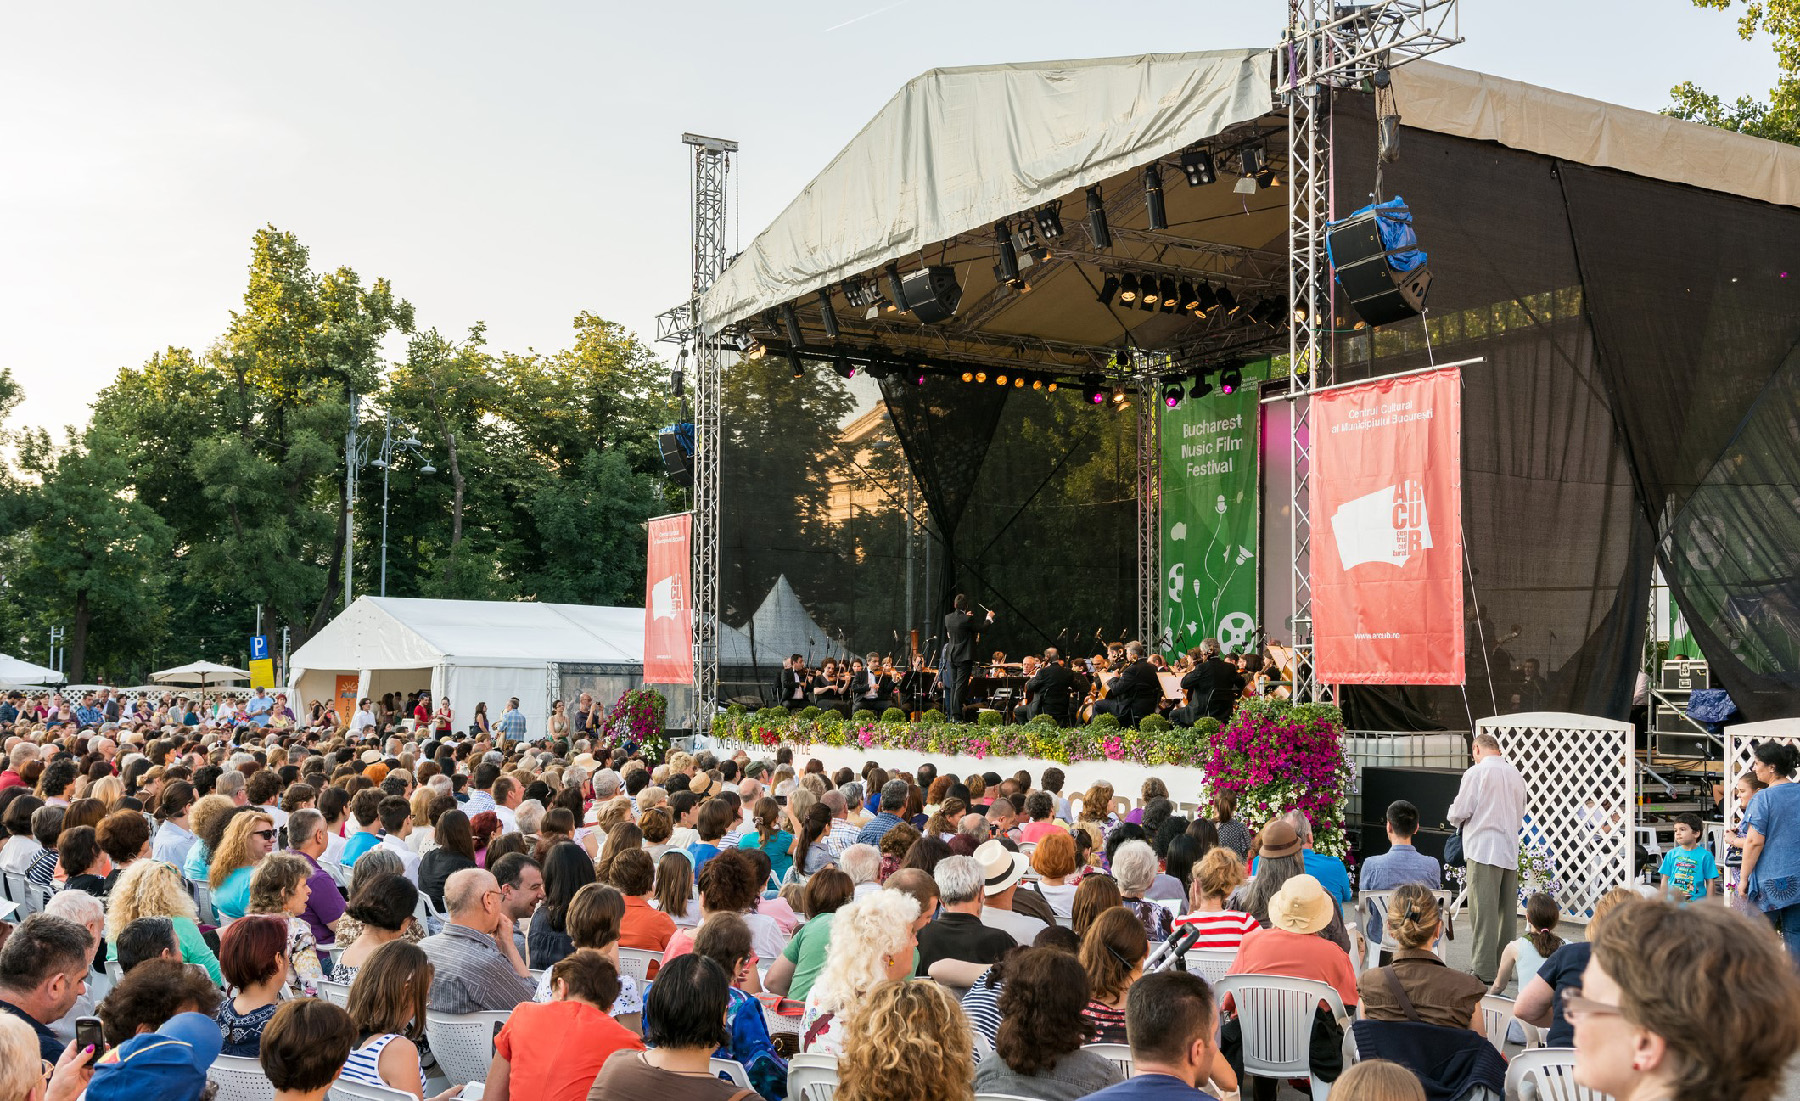 A large outdoor seated crowd listening to an orchestra